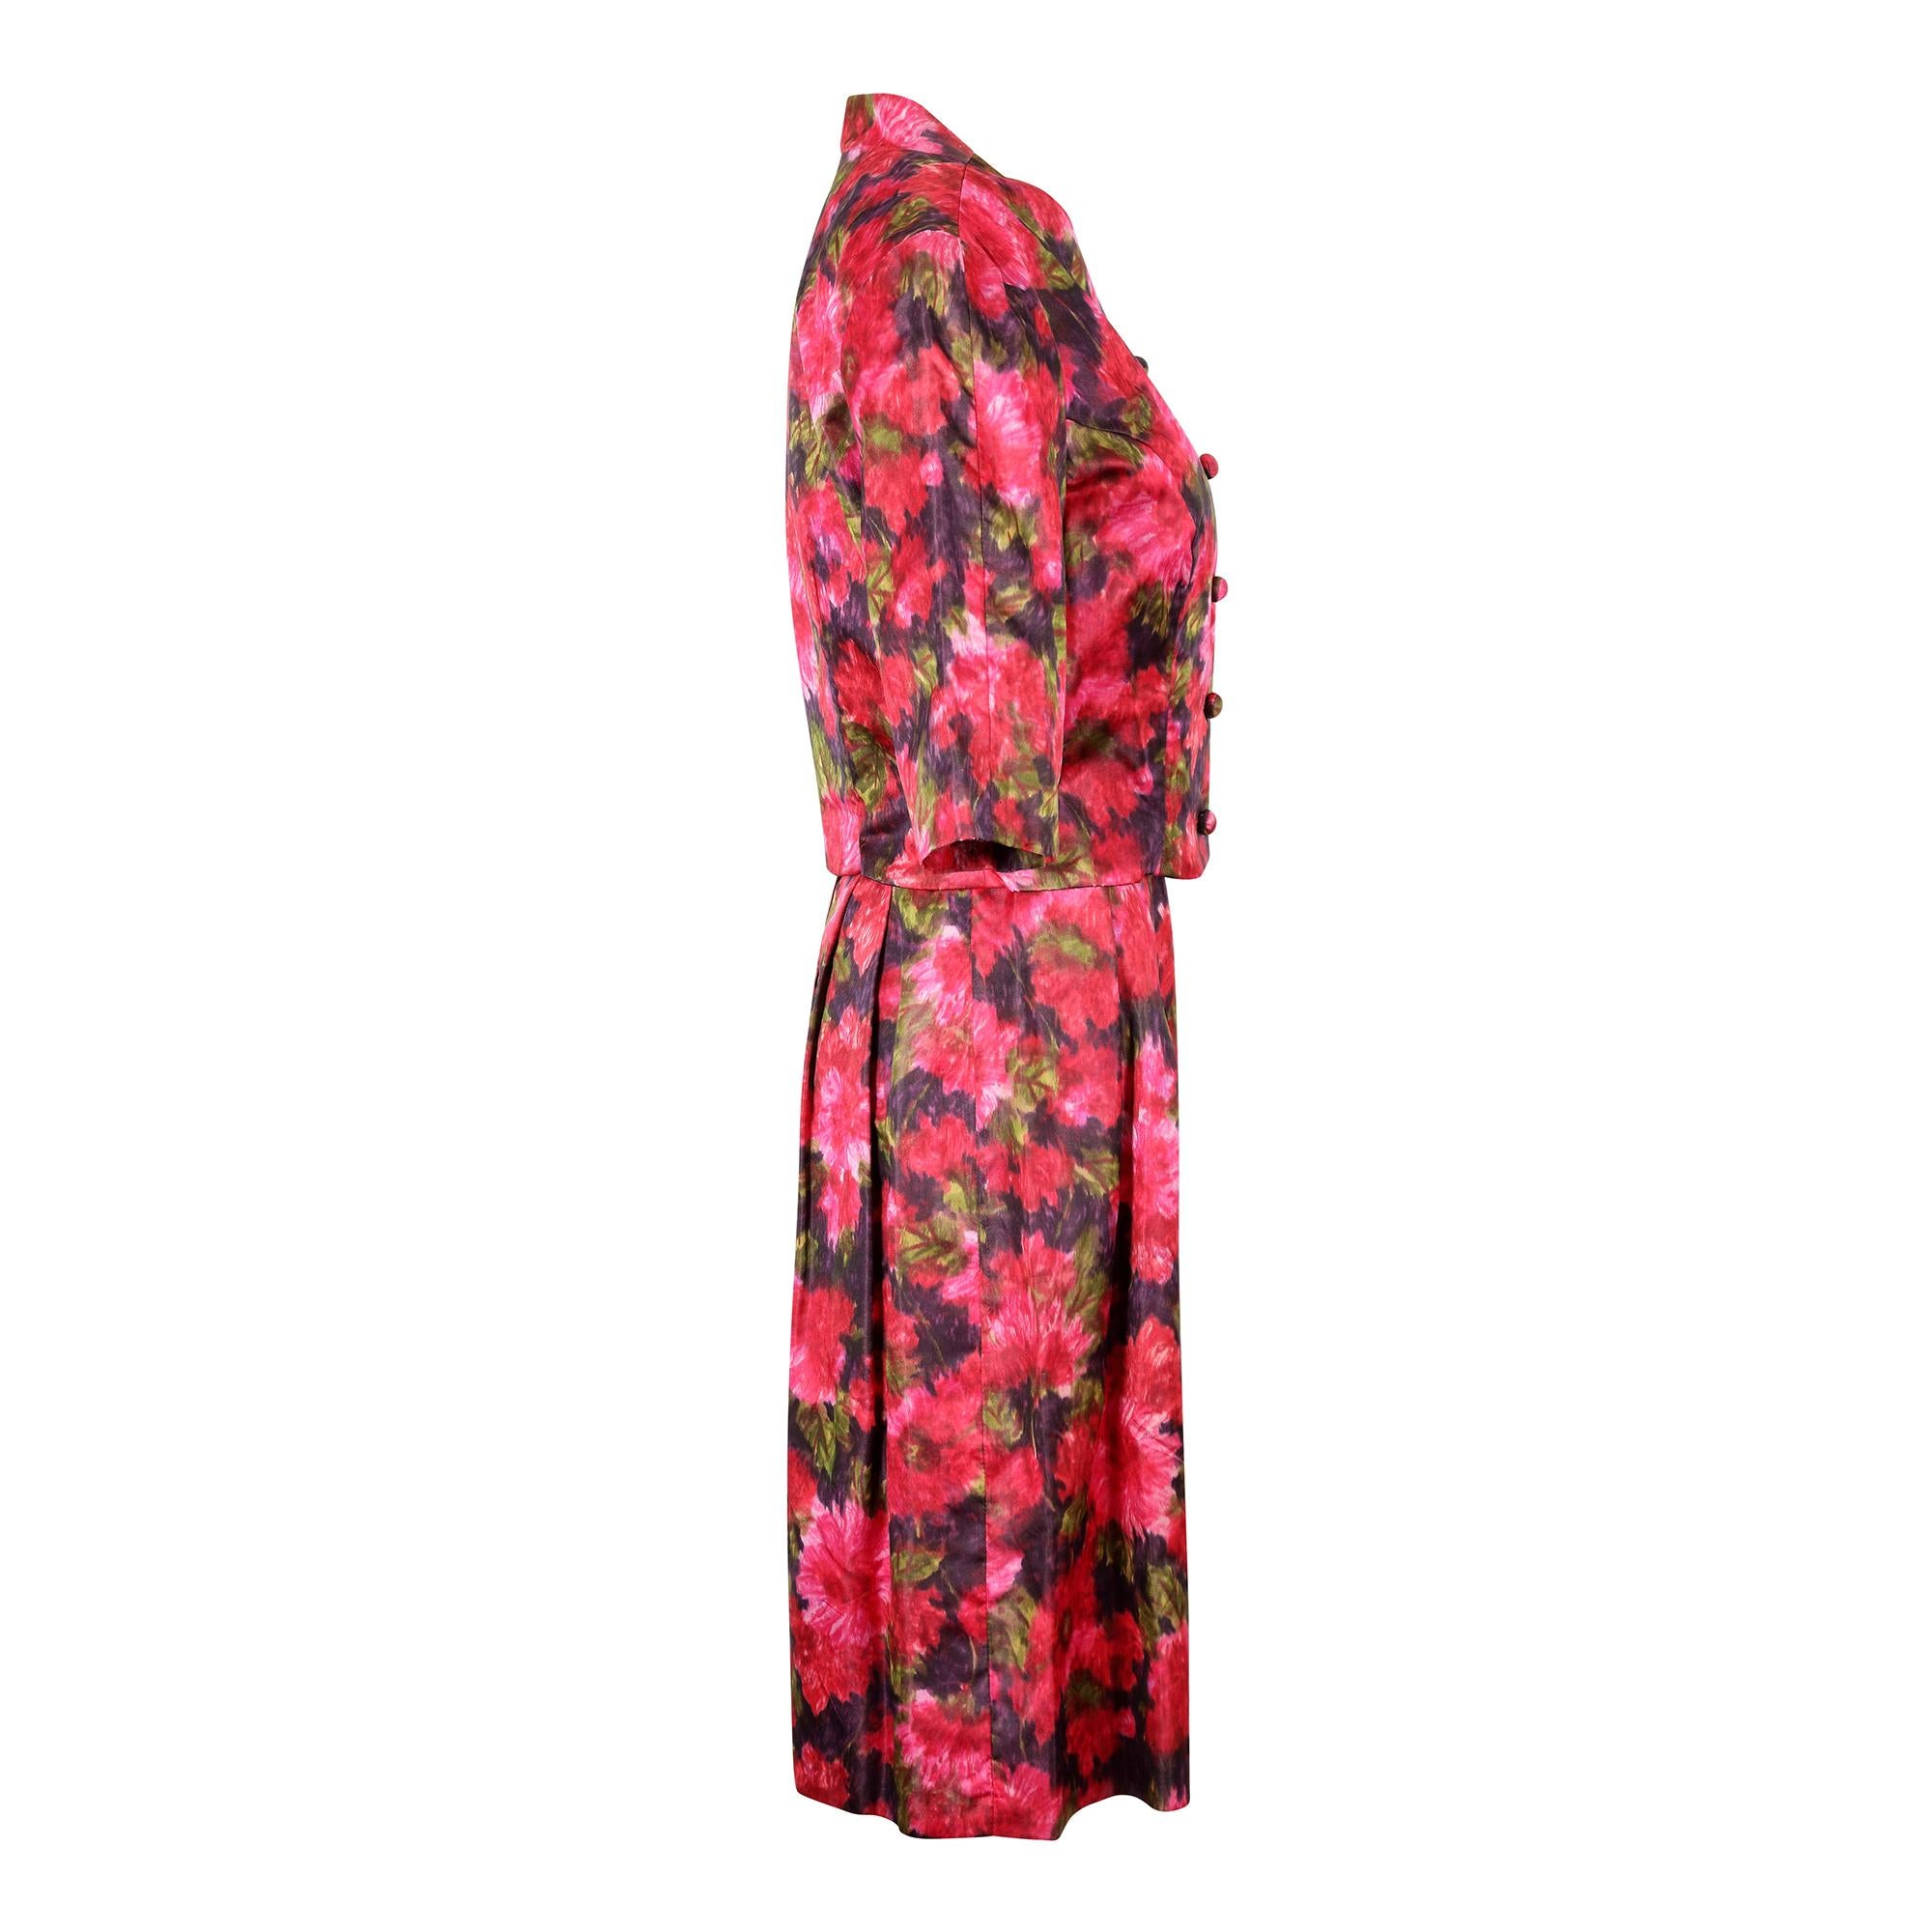 This early 1960s silk satin floral printed dress suit has an attractive floral print in bright shades of cerise pink, red and purple and reminiscent of an impressionist painting. There are some very good quality design details on the dress including